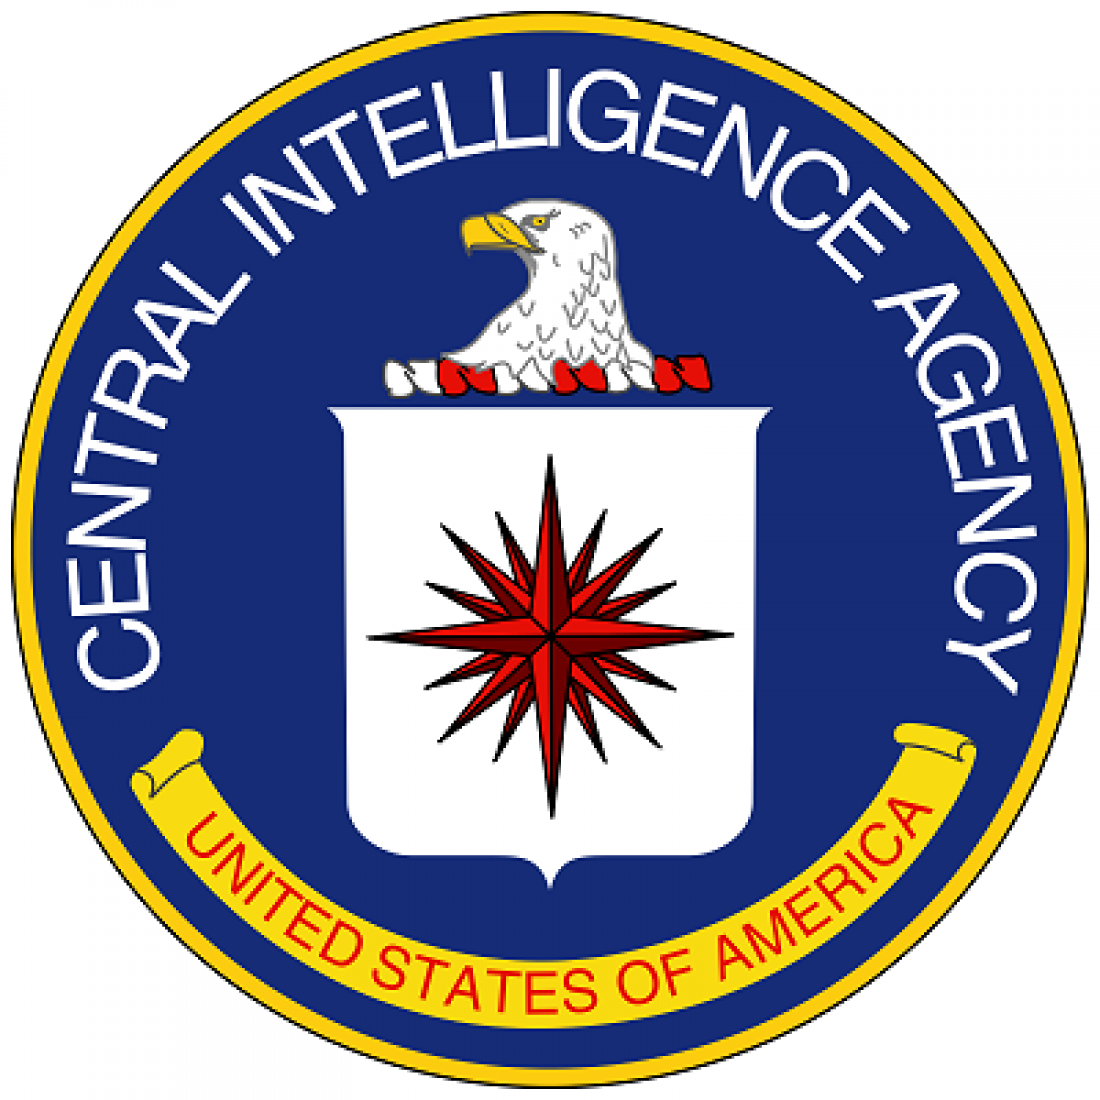 Seal of the Central Intelligence Agency (CIA)